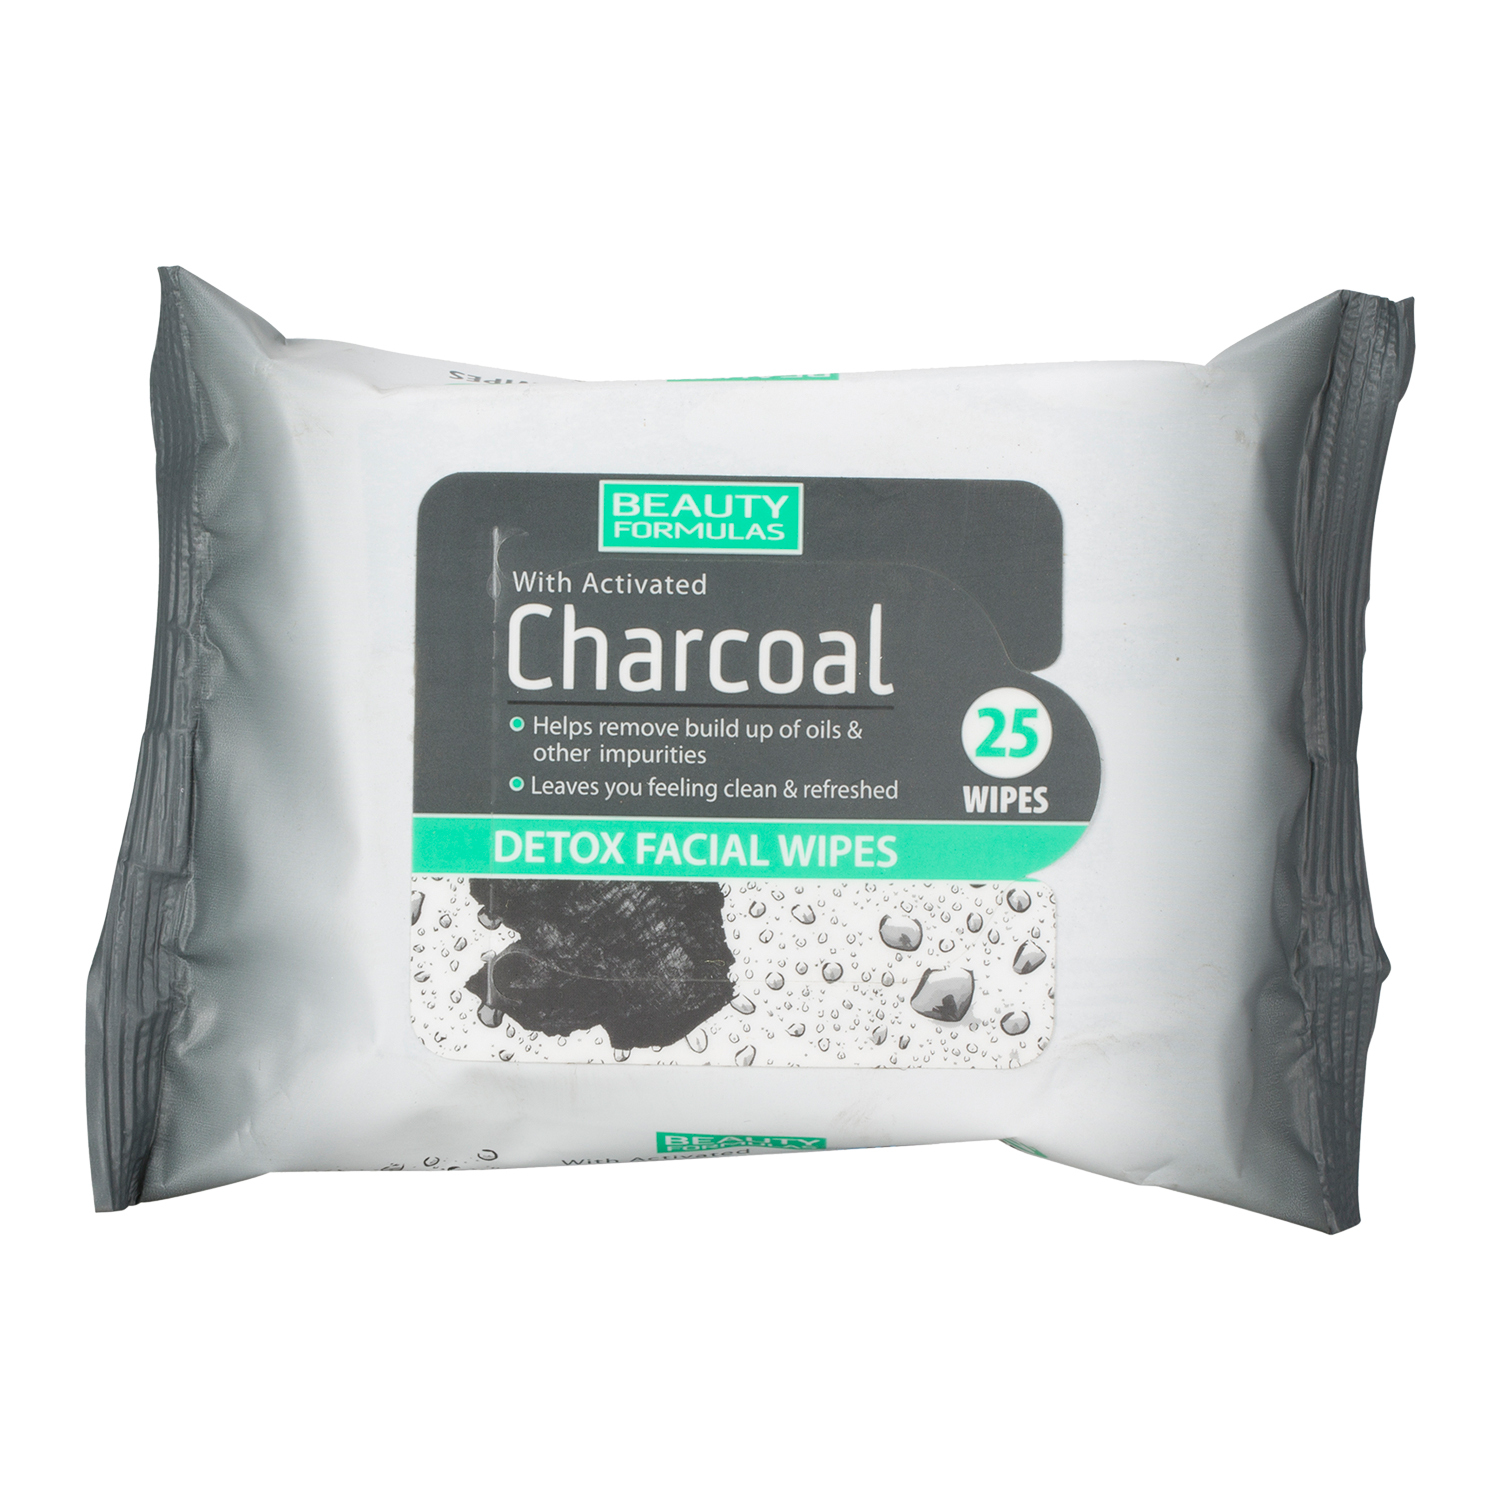 Beauty Formulas Activated Charcoal Facel Wipes 25 Wipes Image